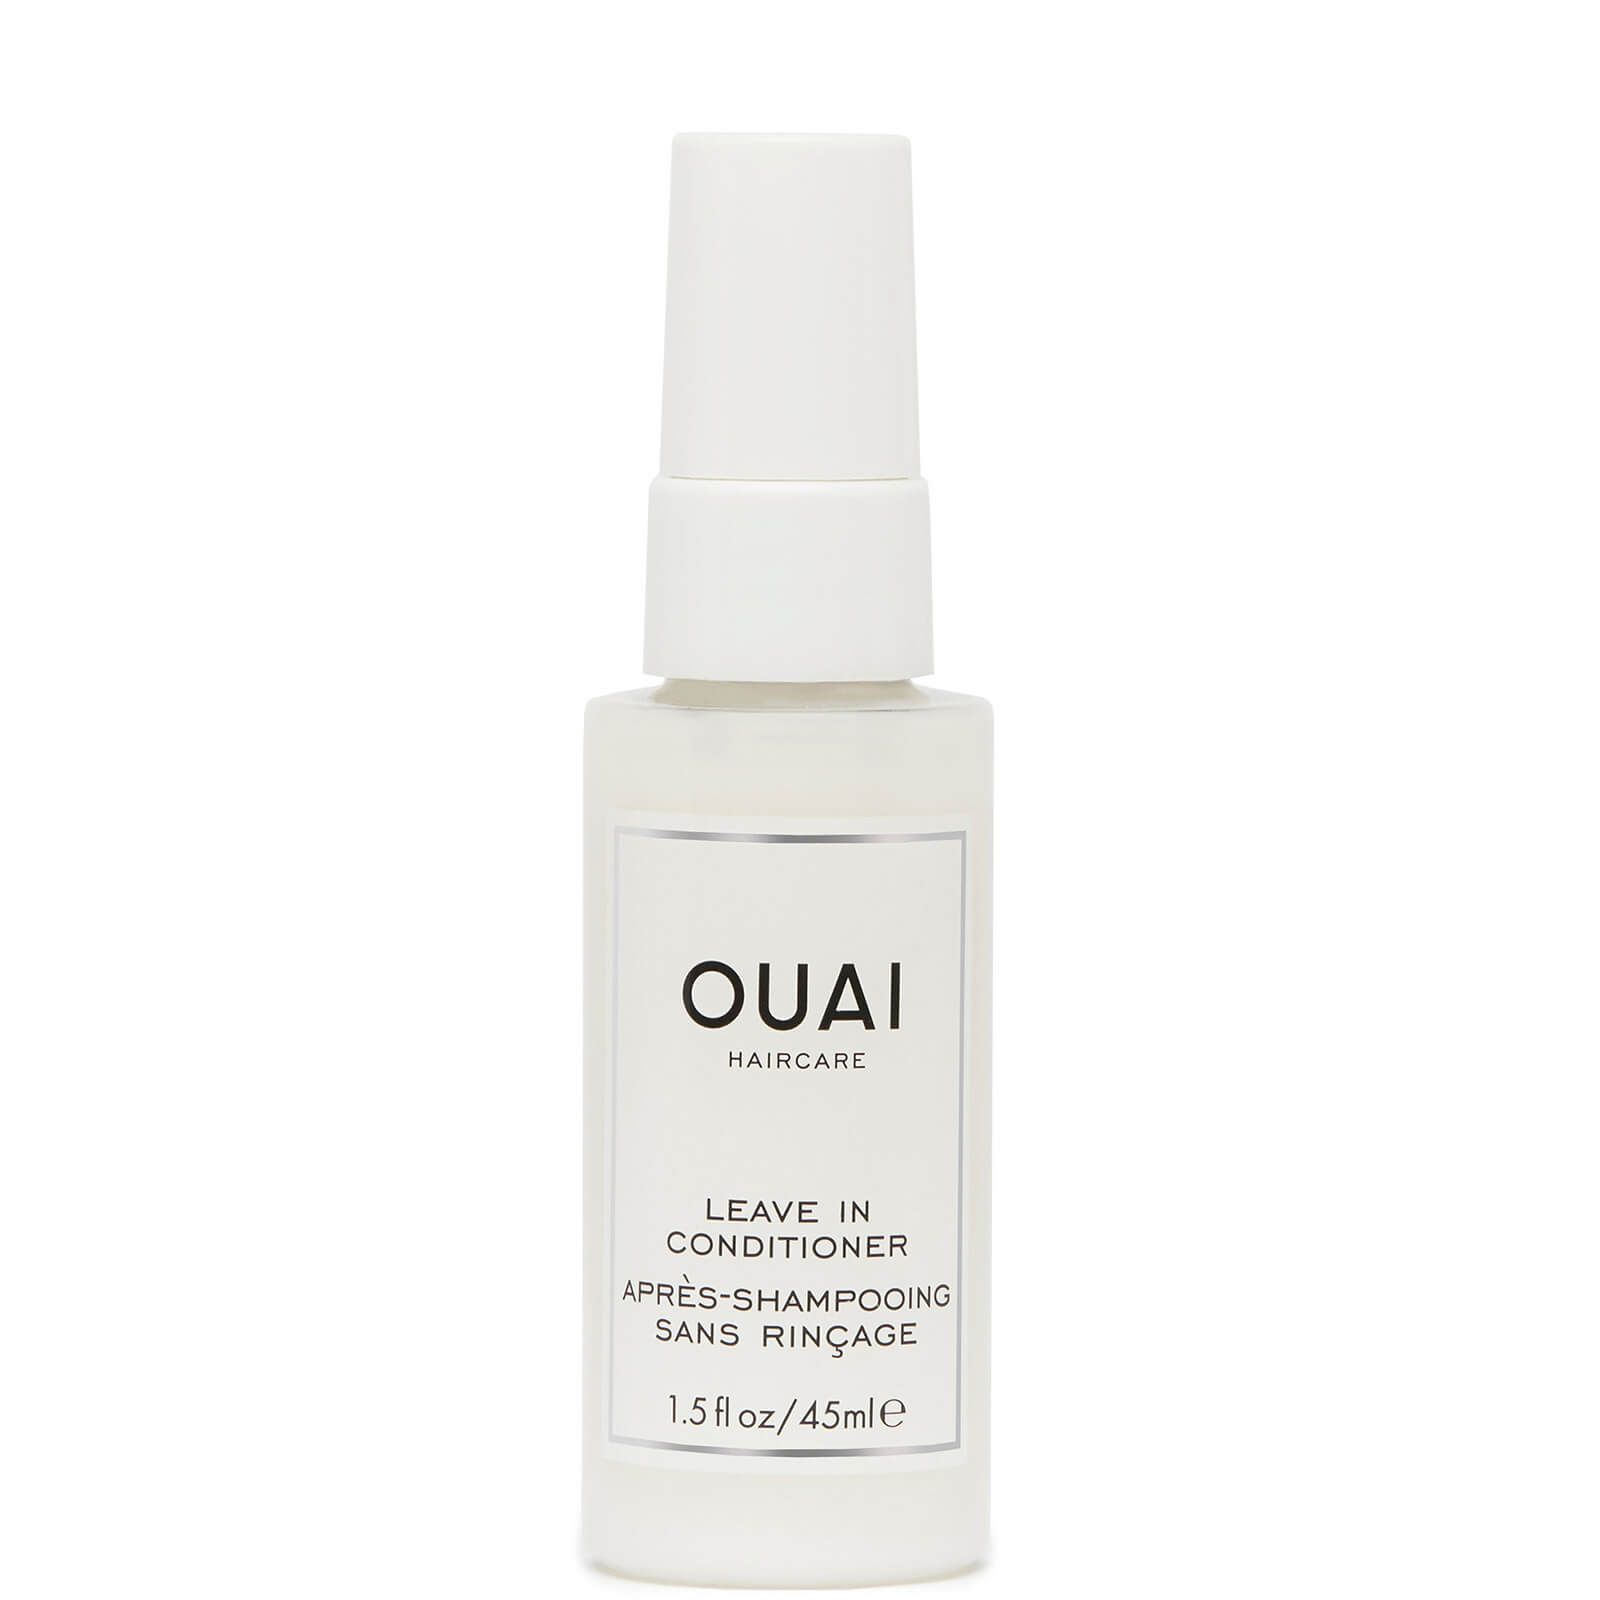 OUAI Haircare Leave In Conditioner 42ml | Cult Beauty (Global)